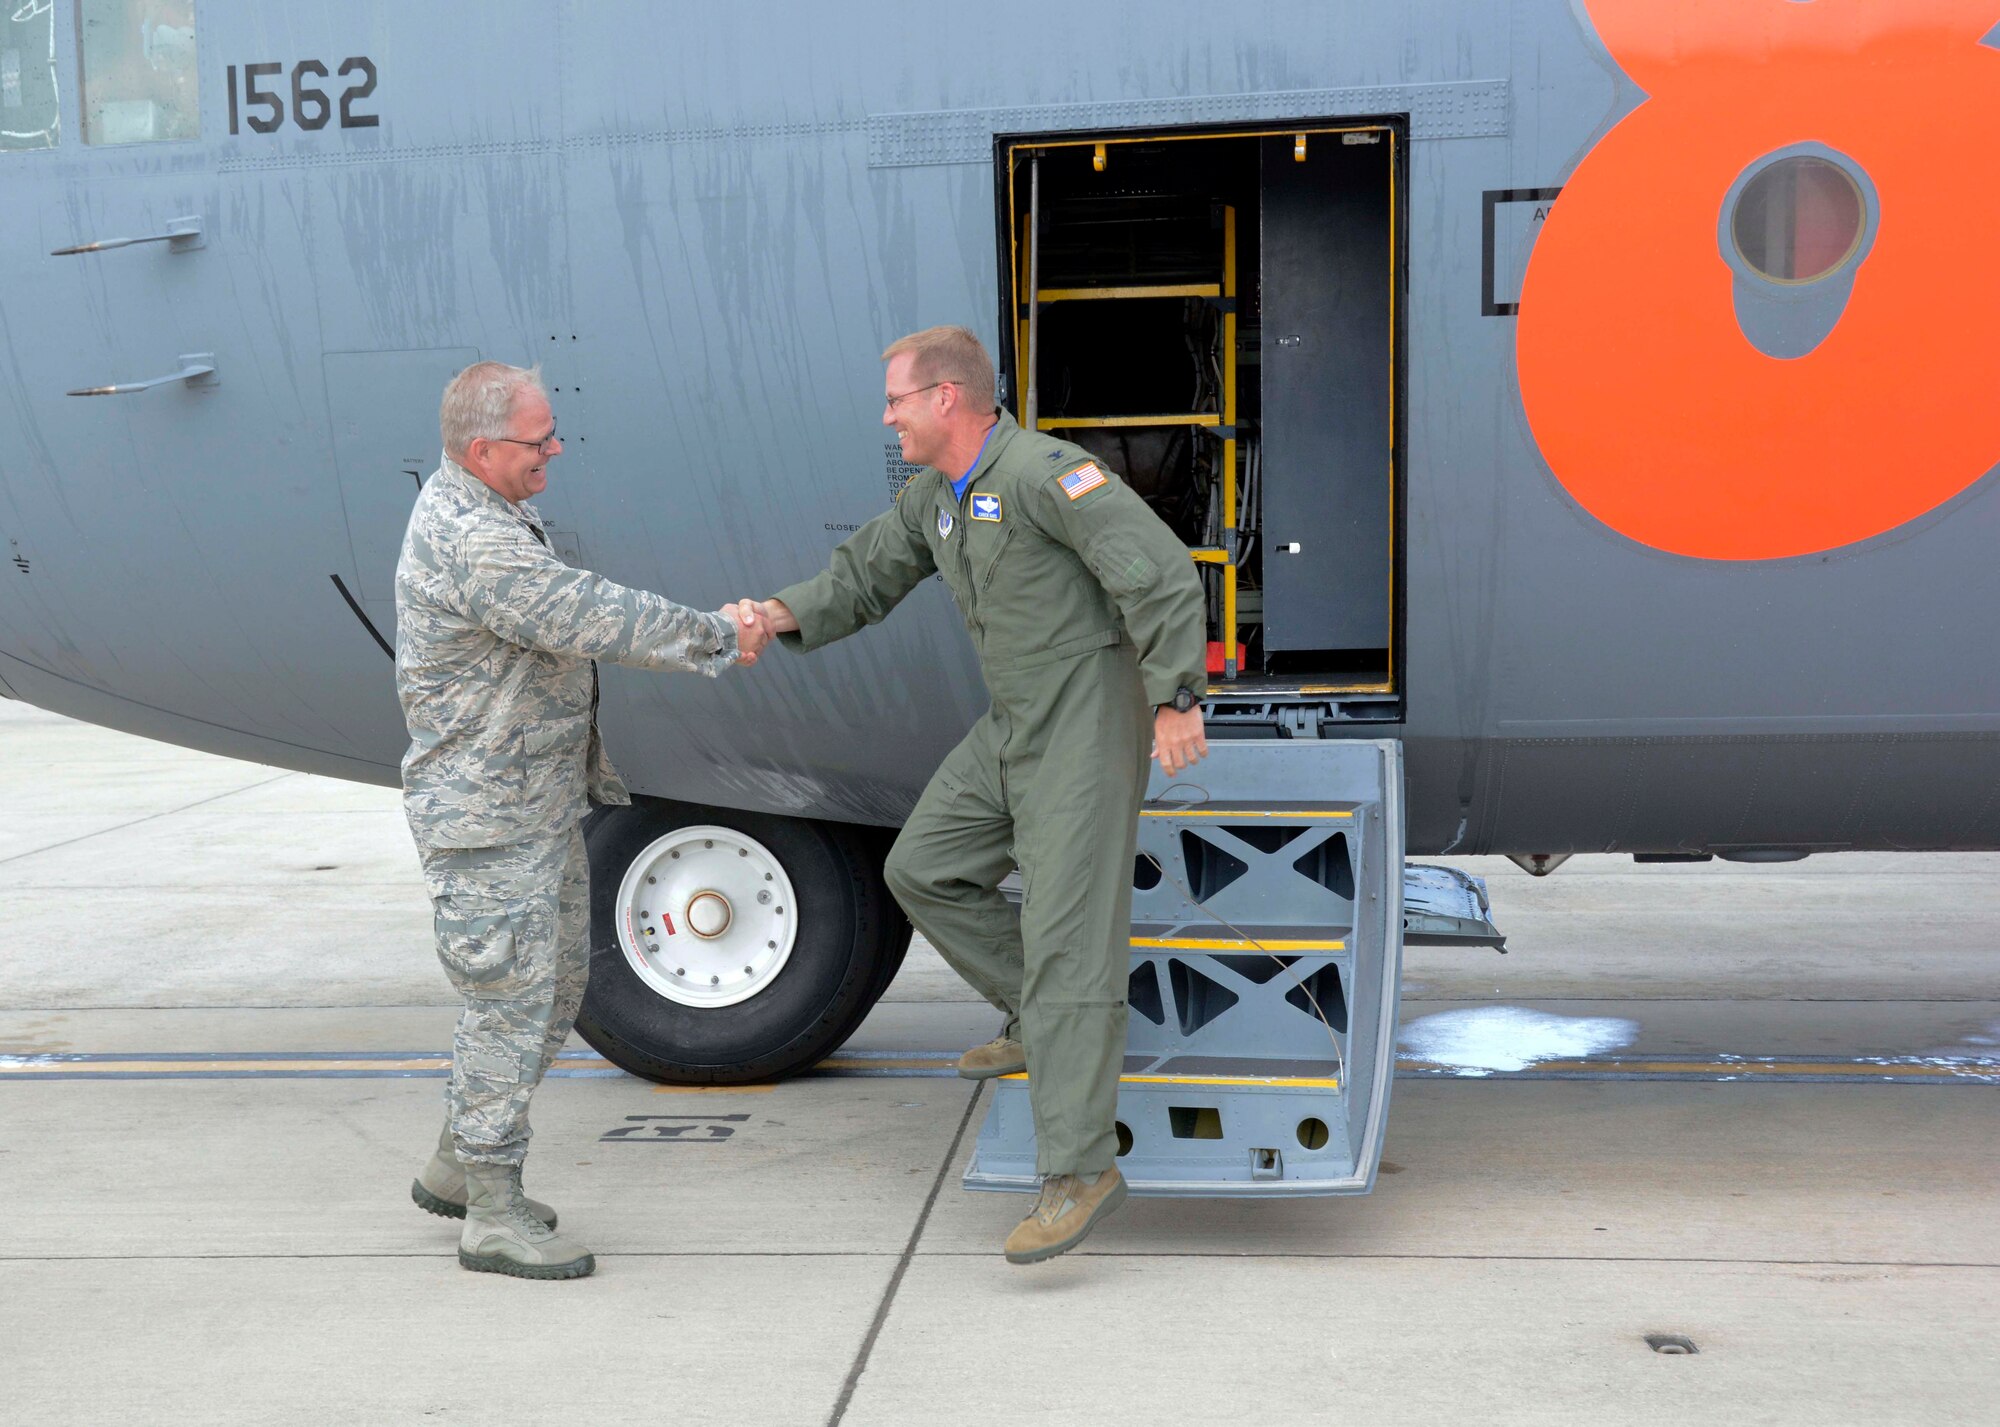 U.S. Air Force Col. Marshall C. Collins, Commander, North Carolina Air National Guard, congratulates Col. Charles D. Davis III, following his final flight onboard a 145th Airlift Wing C-130 Hercules aircraft, at the North Carolina Air National Guard Base, Charlotte Douglas International Airport, July 28, 2015. Davis completed his “fini” flight, symbolizing the end of 38 years of honorable military service. (U.S. Air National Guard photo by Master Sgt. Patricia F. Moran, 145th Public Affairs/Released)